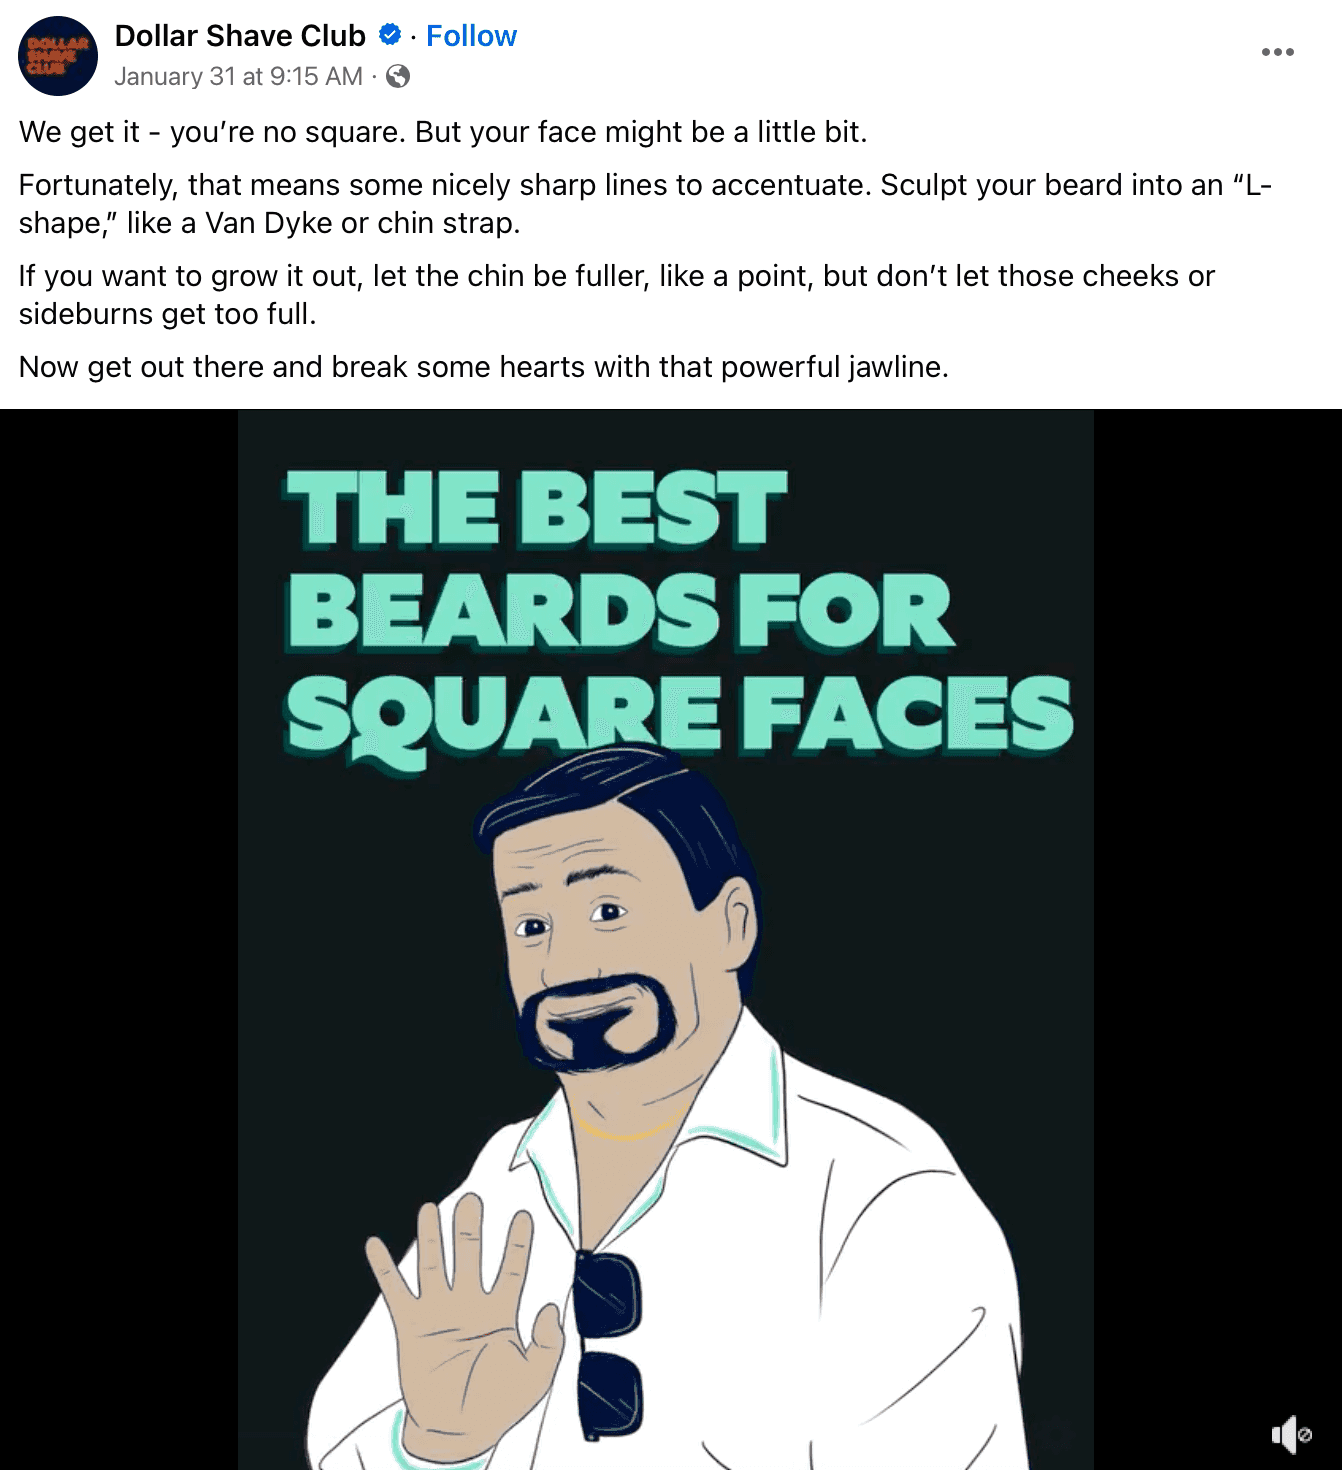 Dollar Shave Club Facebook post about best beards for square-shaped faces